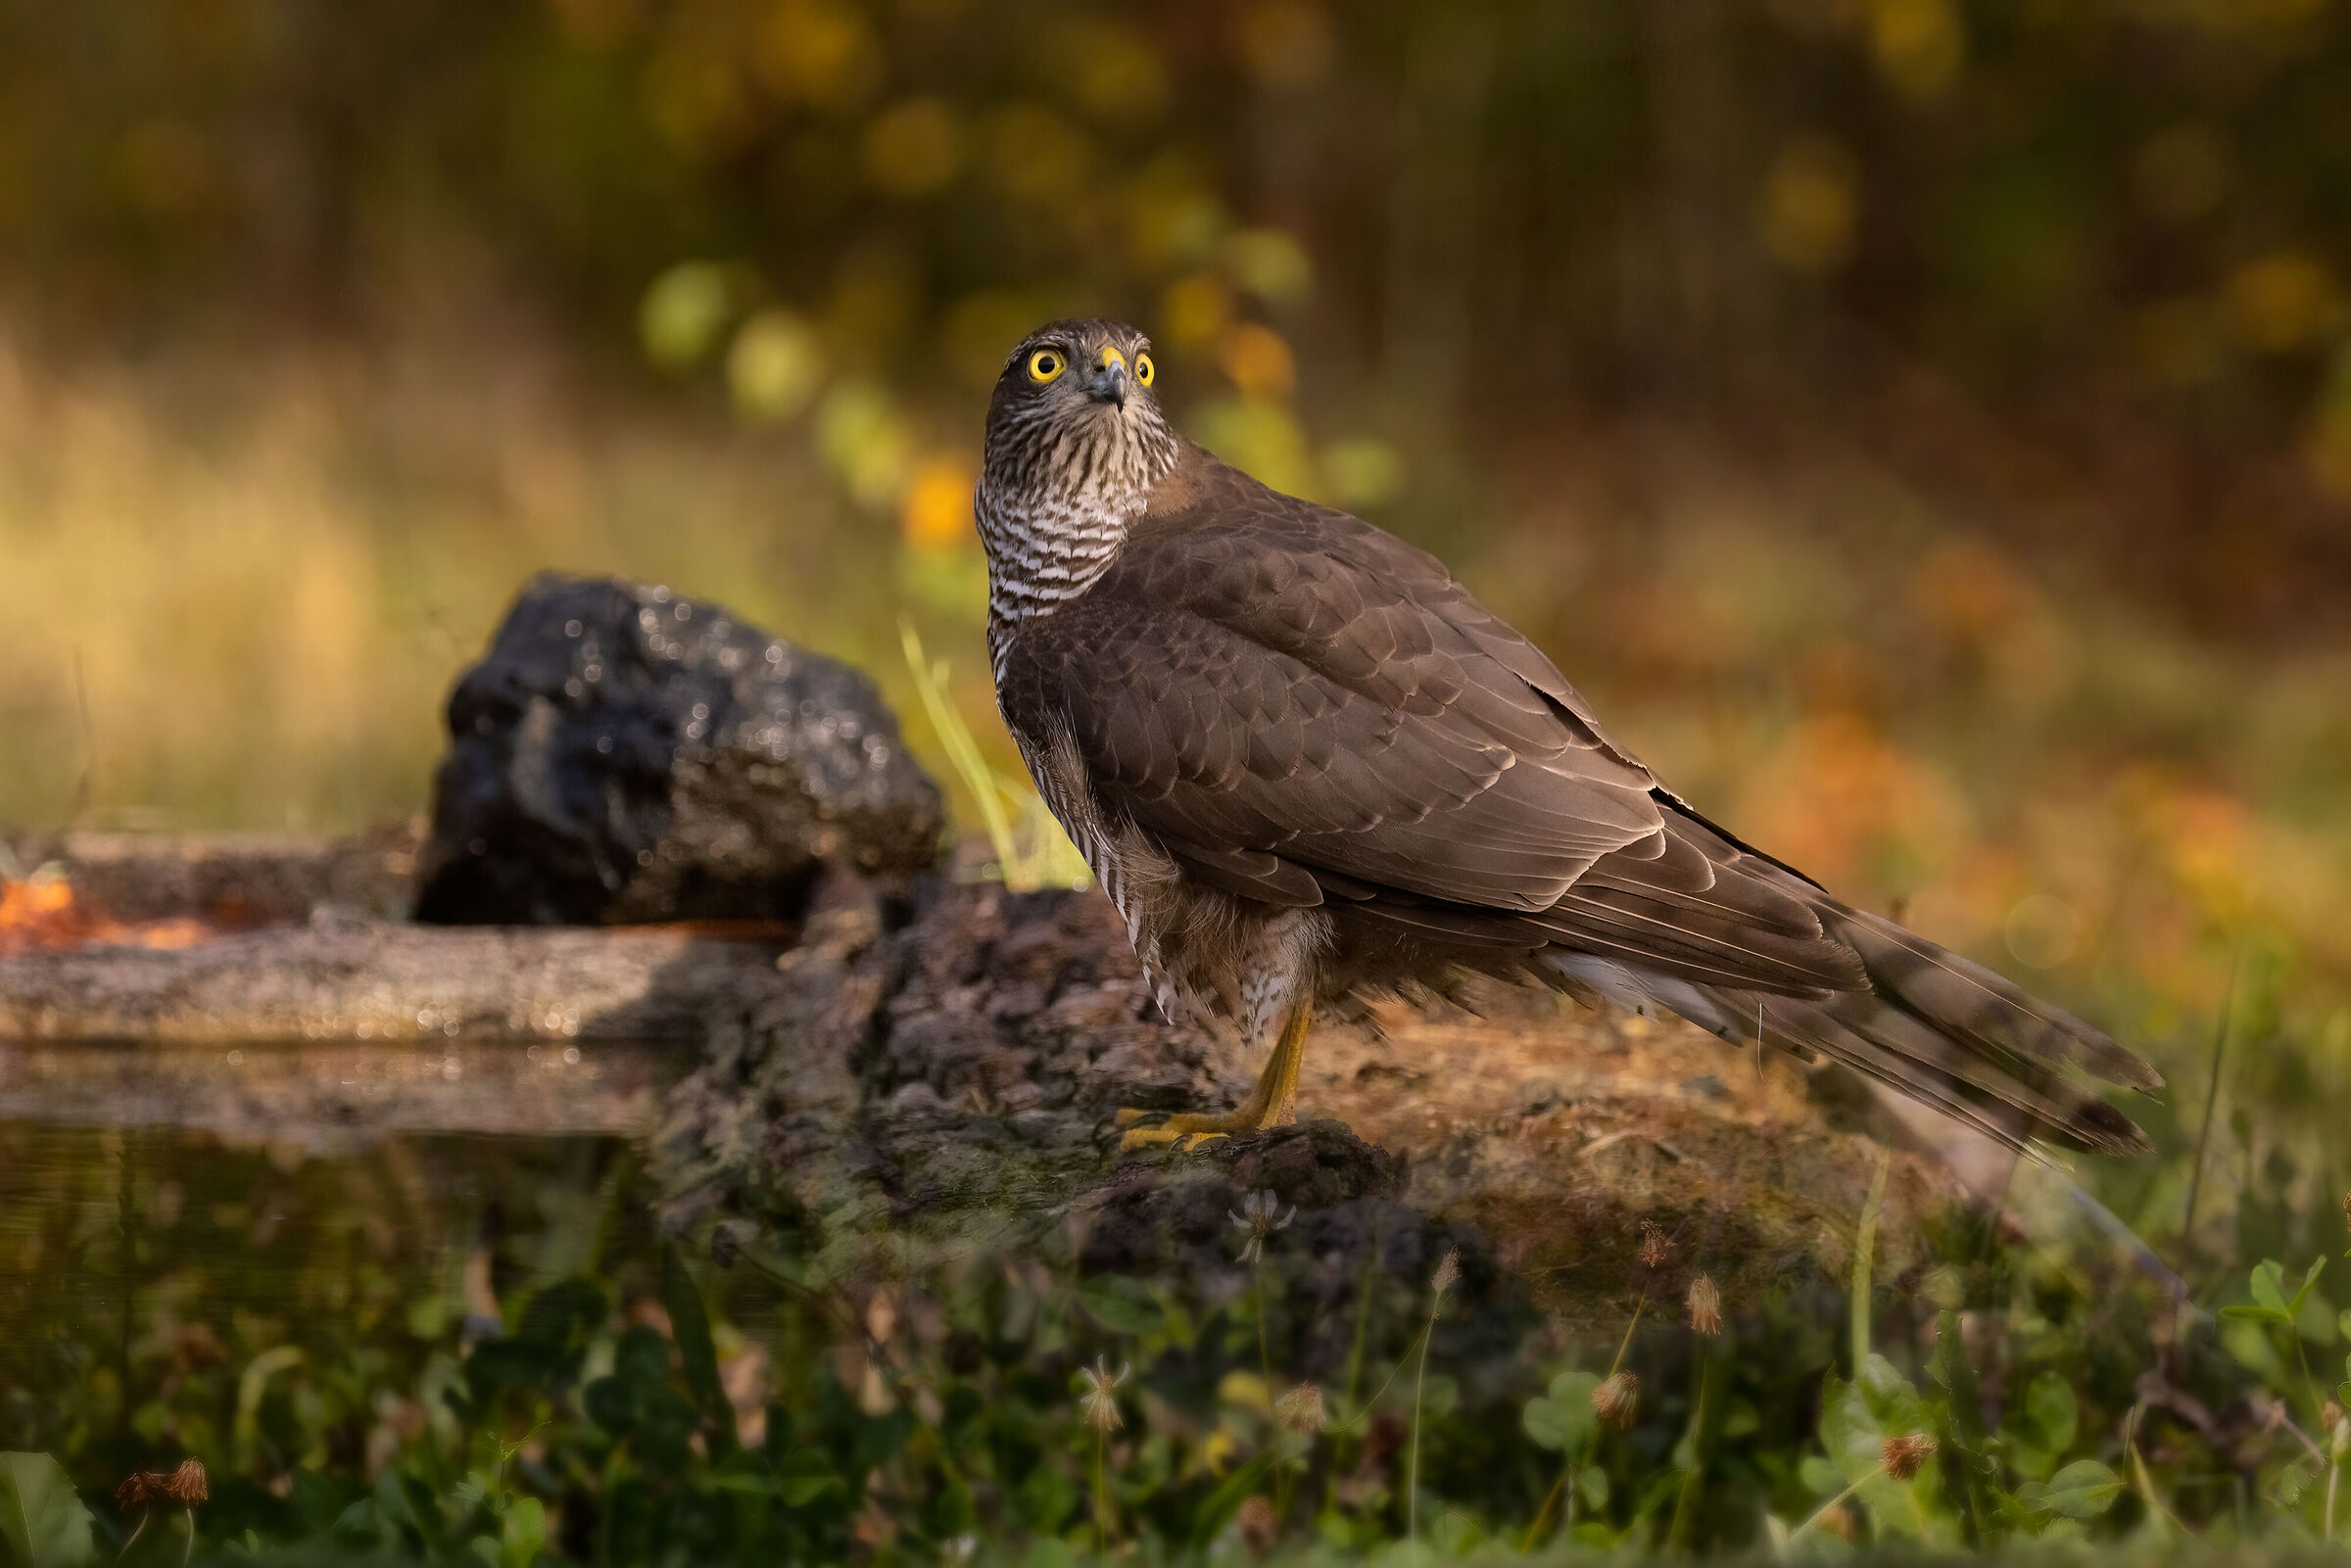 Sparrowhawk ♀ at the puddle...